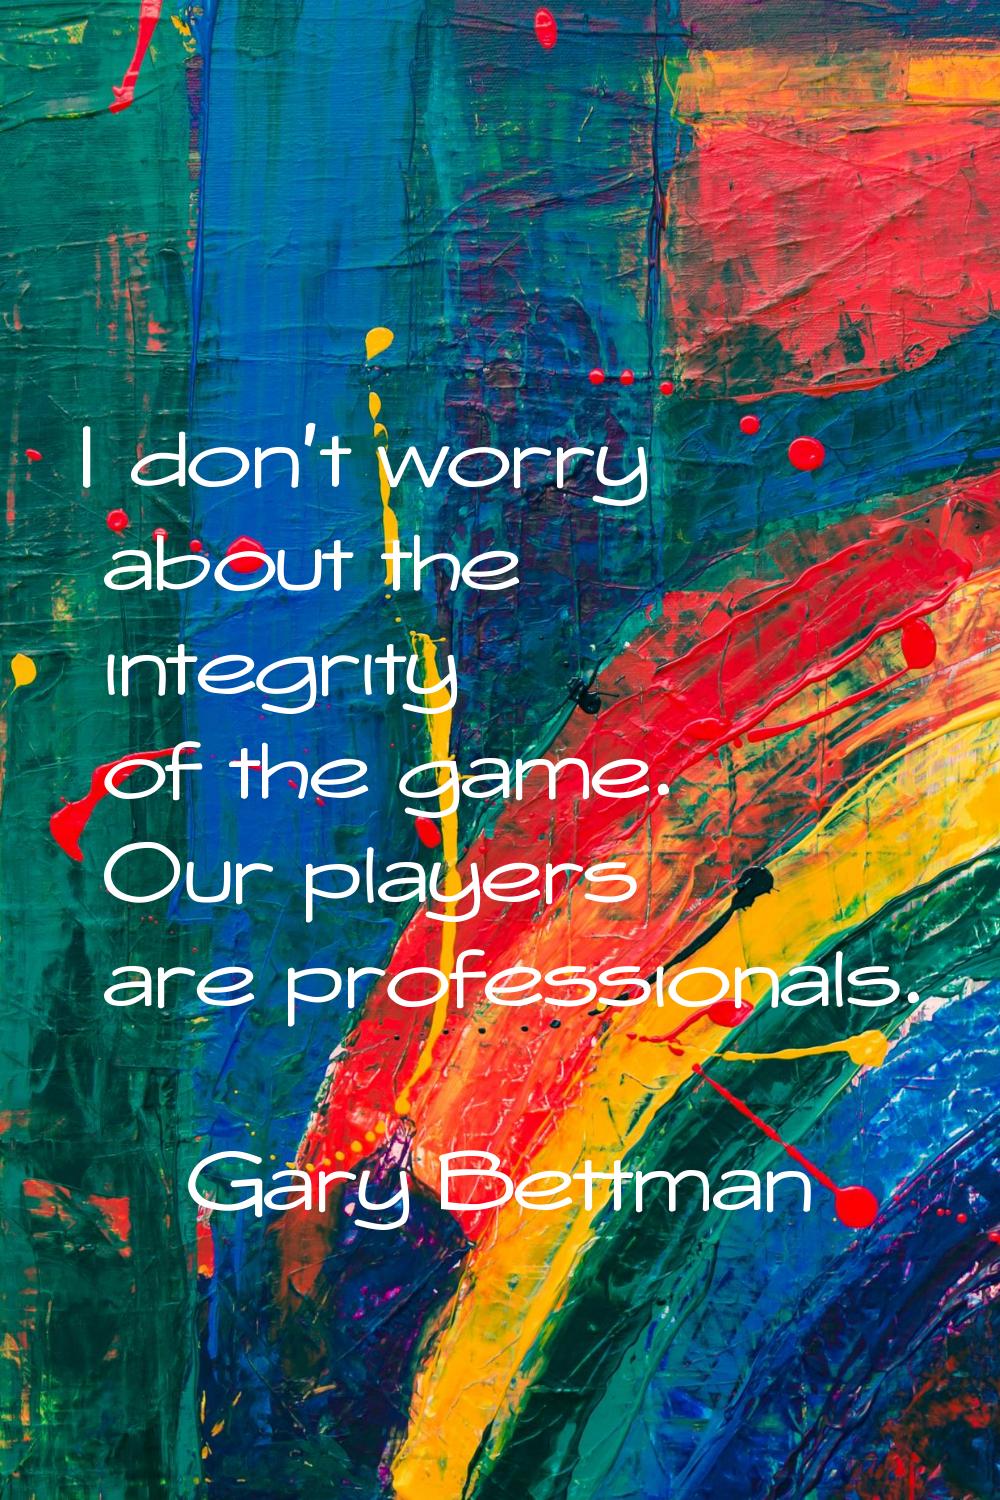 I don't worry about the integrity of the game. Our players are professionals.